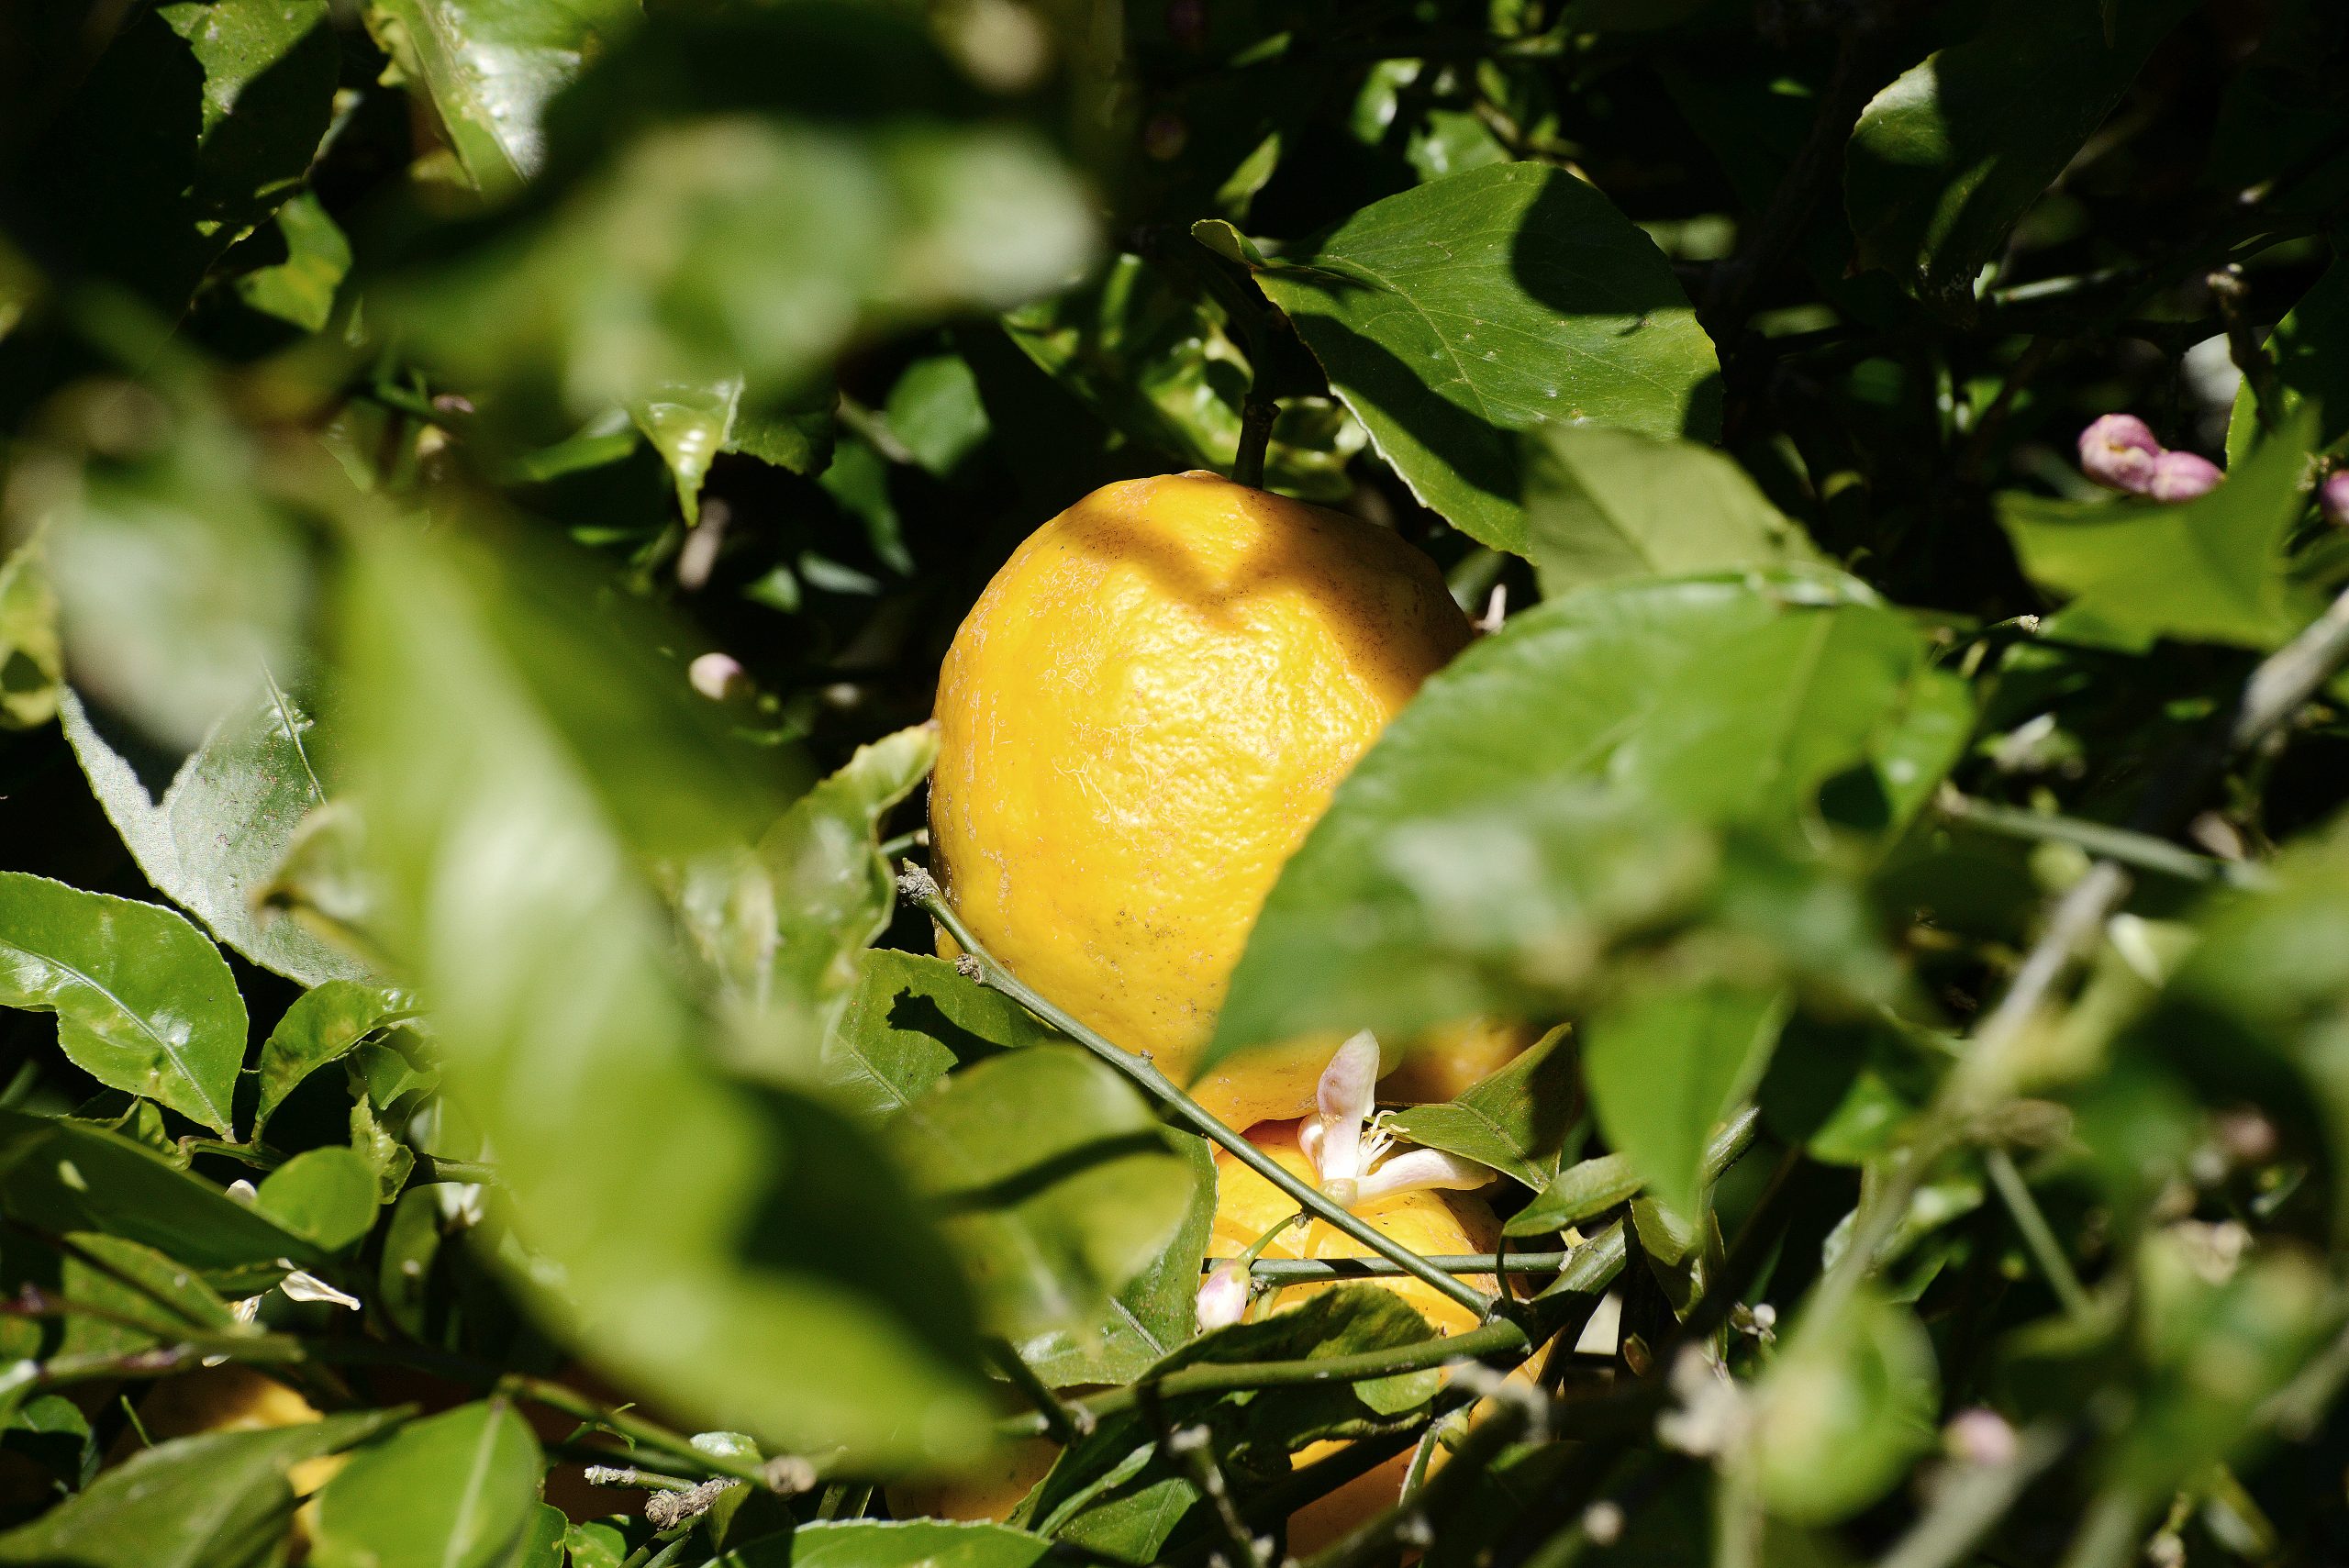 Close up on a citrus in a field.